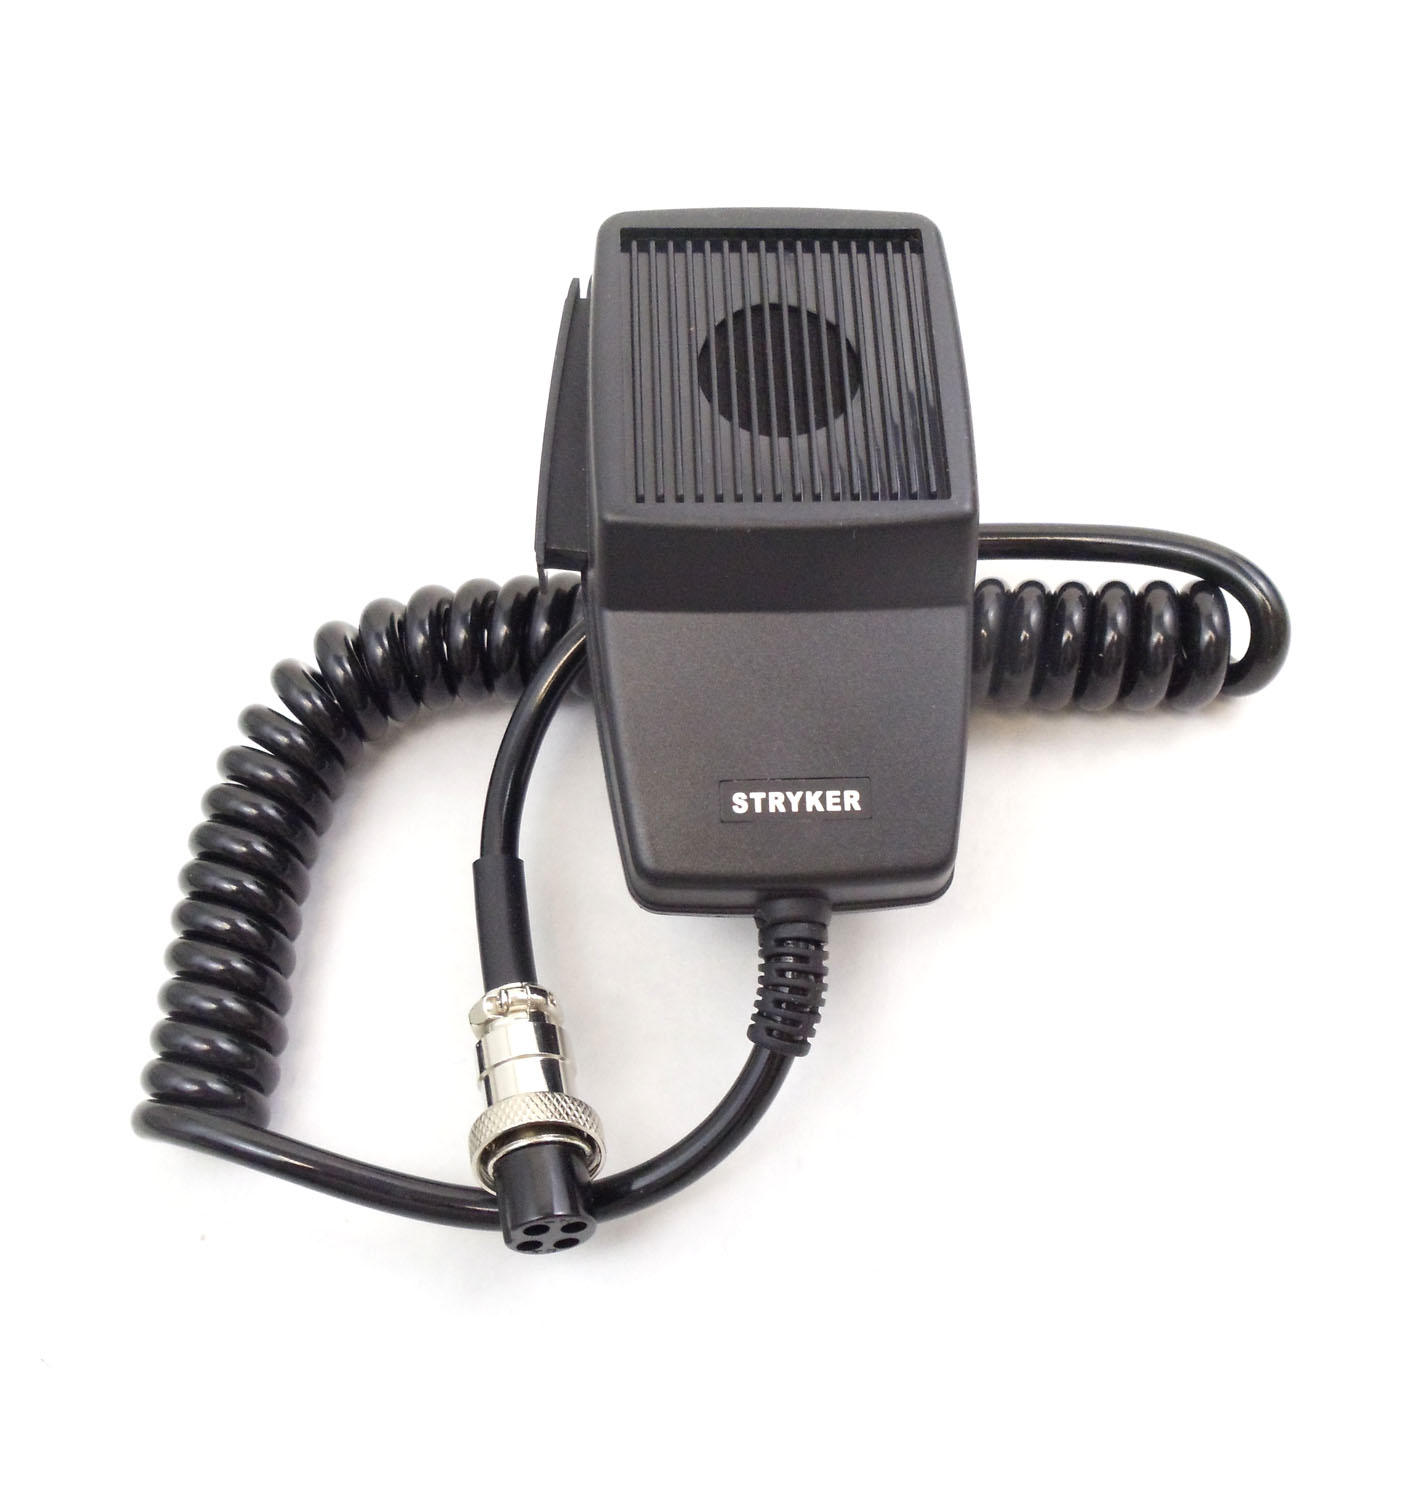 Stryker - 4 Pin Replacement Microphone For Sr955Hpc & Sr655Hpc Radios